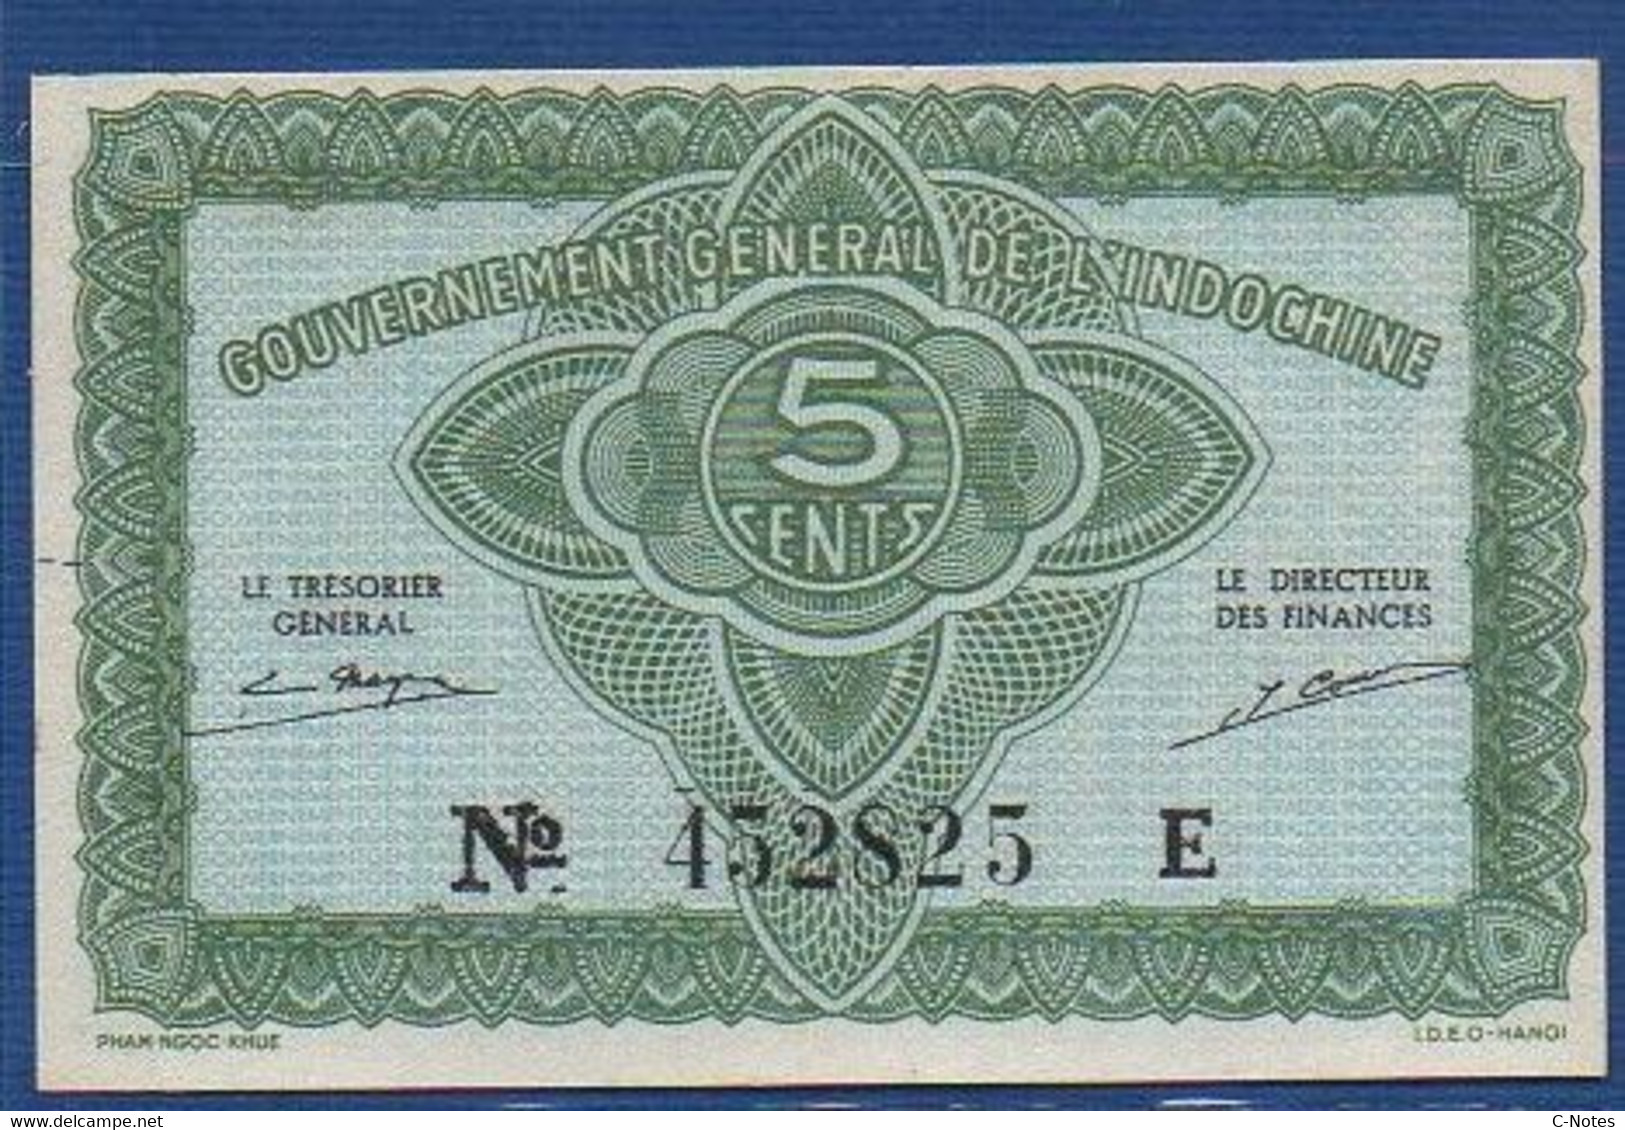 FRENCH INDOCHINA - P. 88a –  5 Cents ND (1942) AUNC-, S/n 452825 E - Indochine